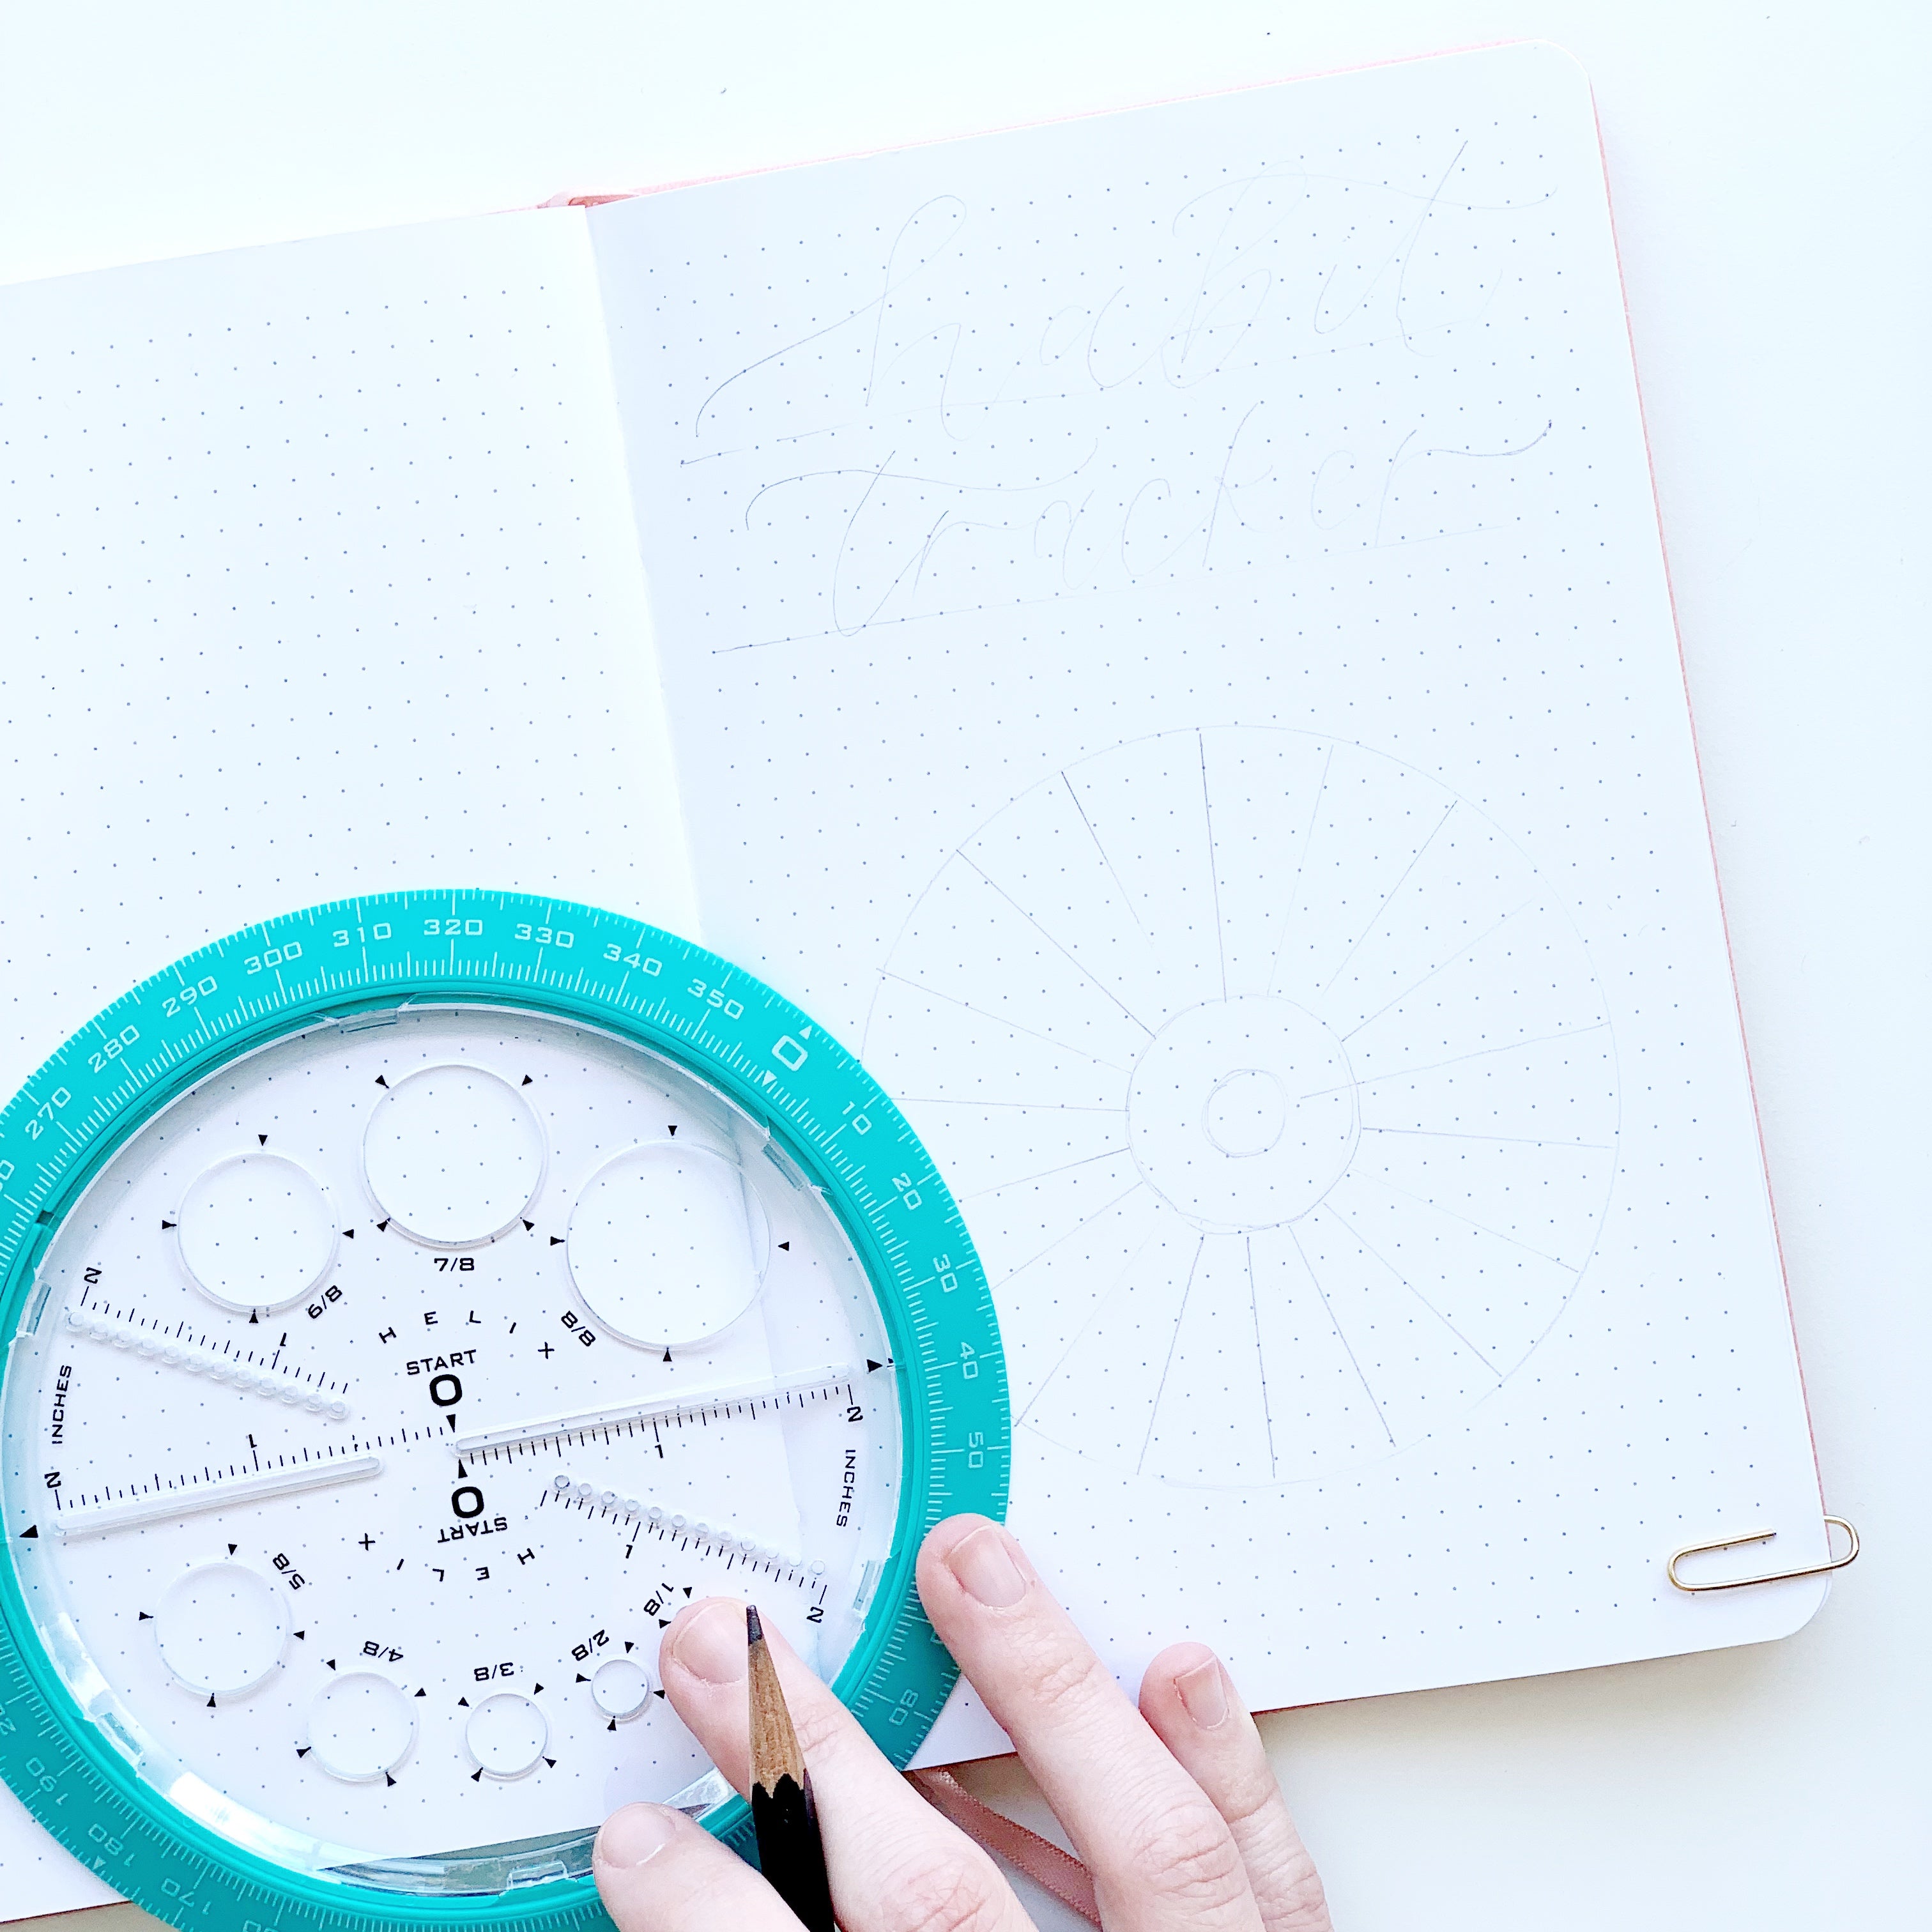 Learn how to make a sunflower habit tracker in your dot grid notebook with Adrienne from @studio80design!